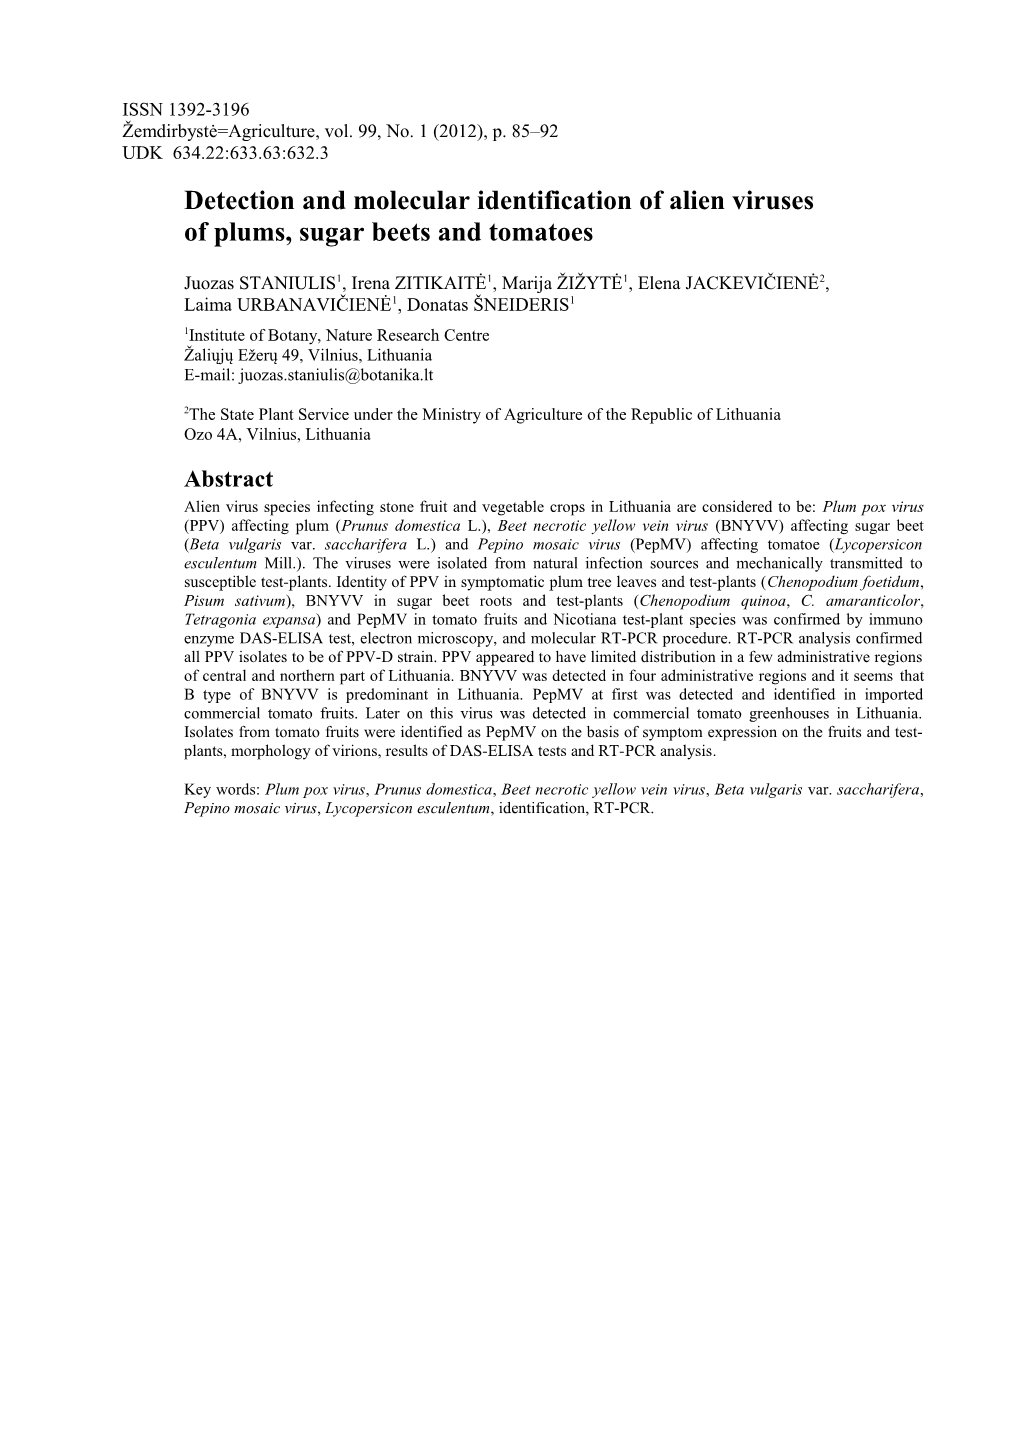 Detection and Molecular Identification of Alien Viruses of Plums, Sugar Beets and Tomatoes